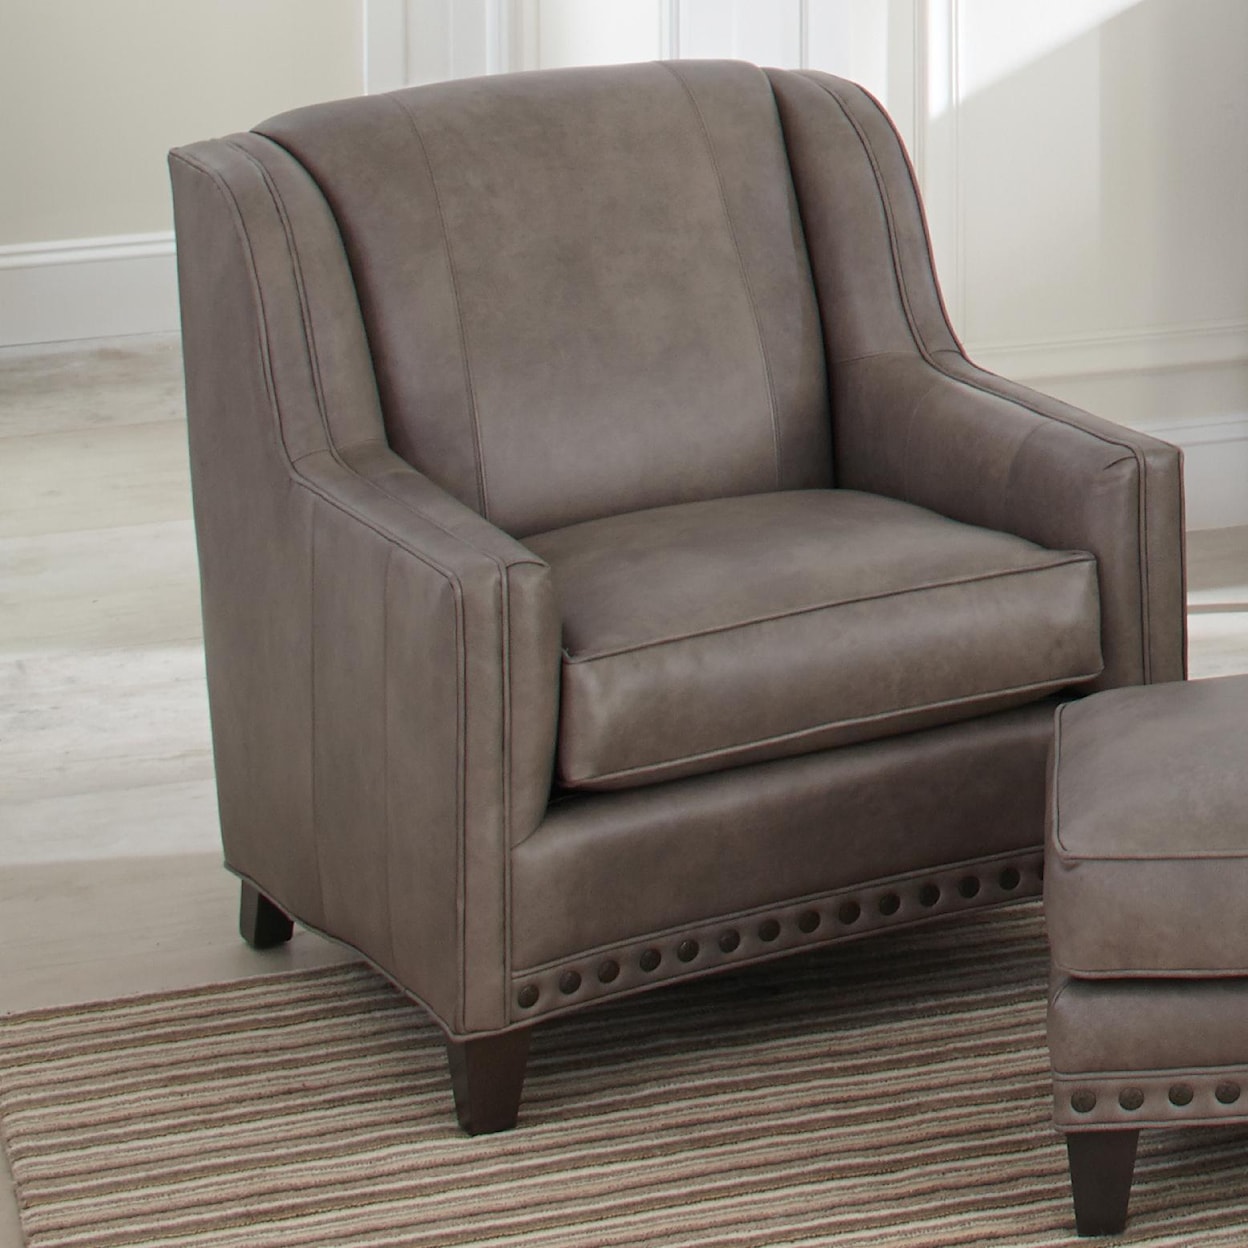 Smith Brothers 227 Upholstered Chair